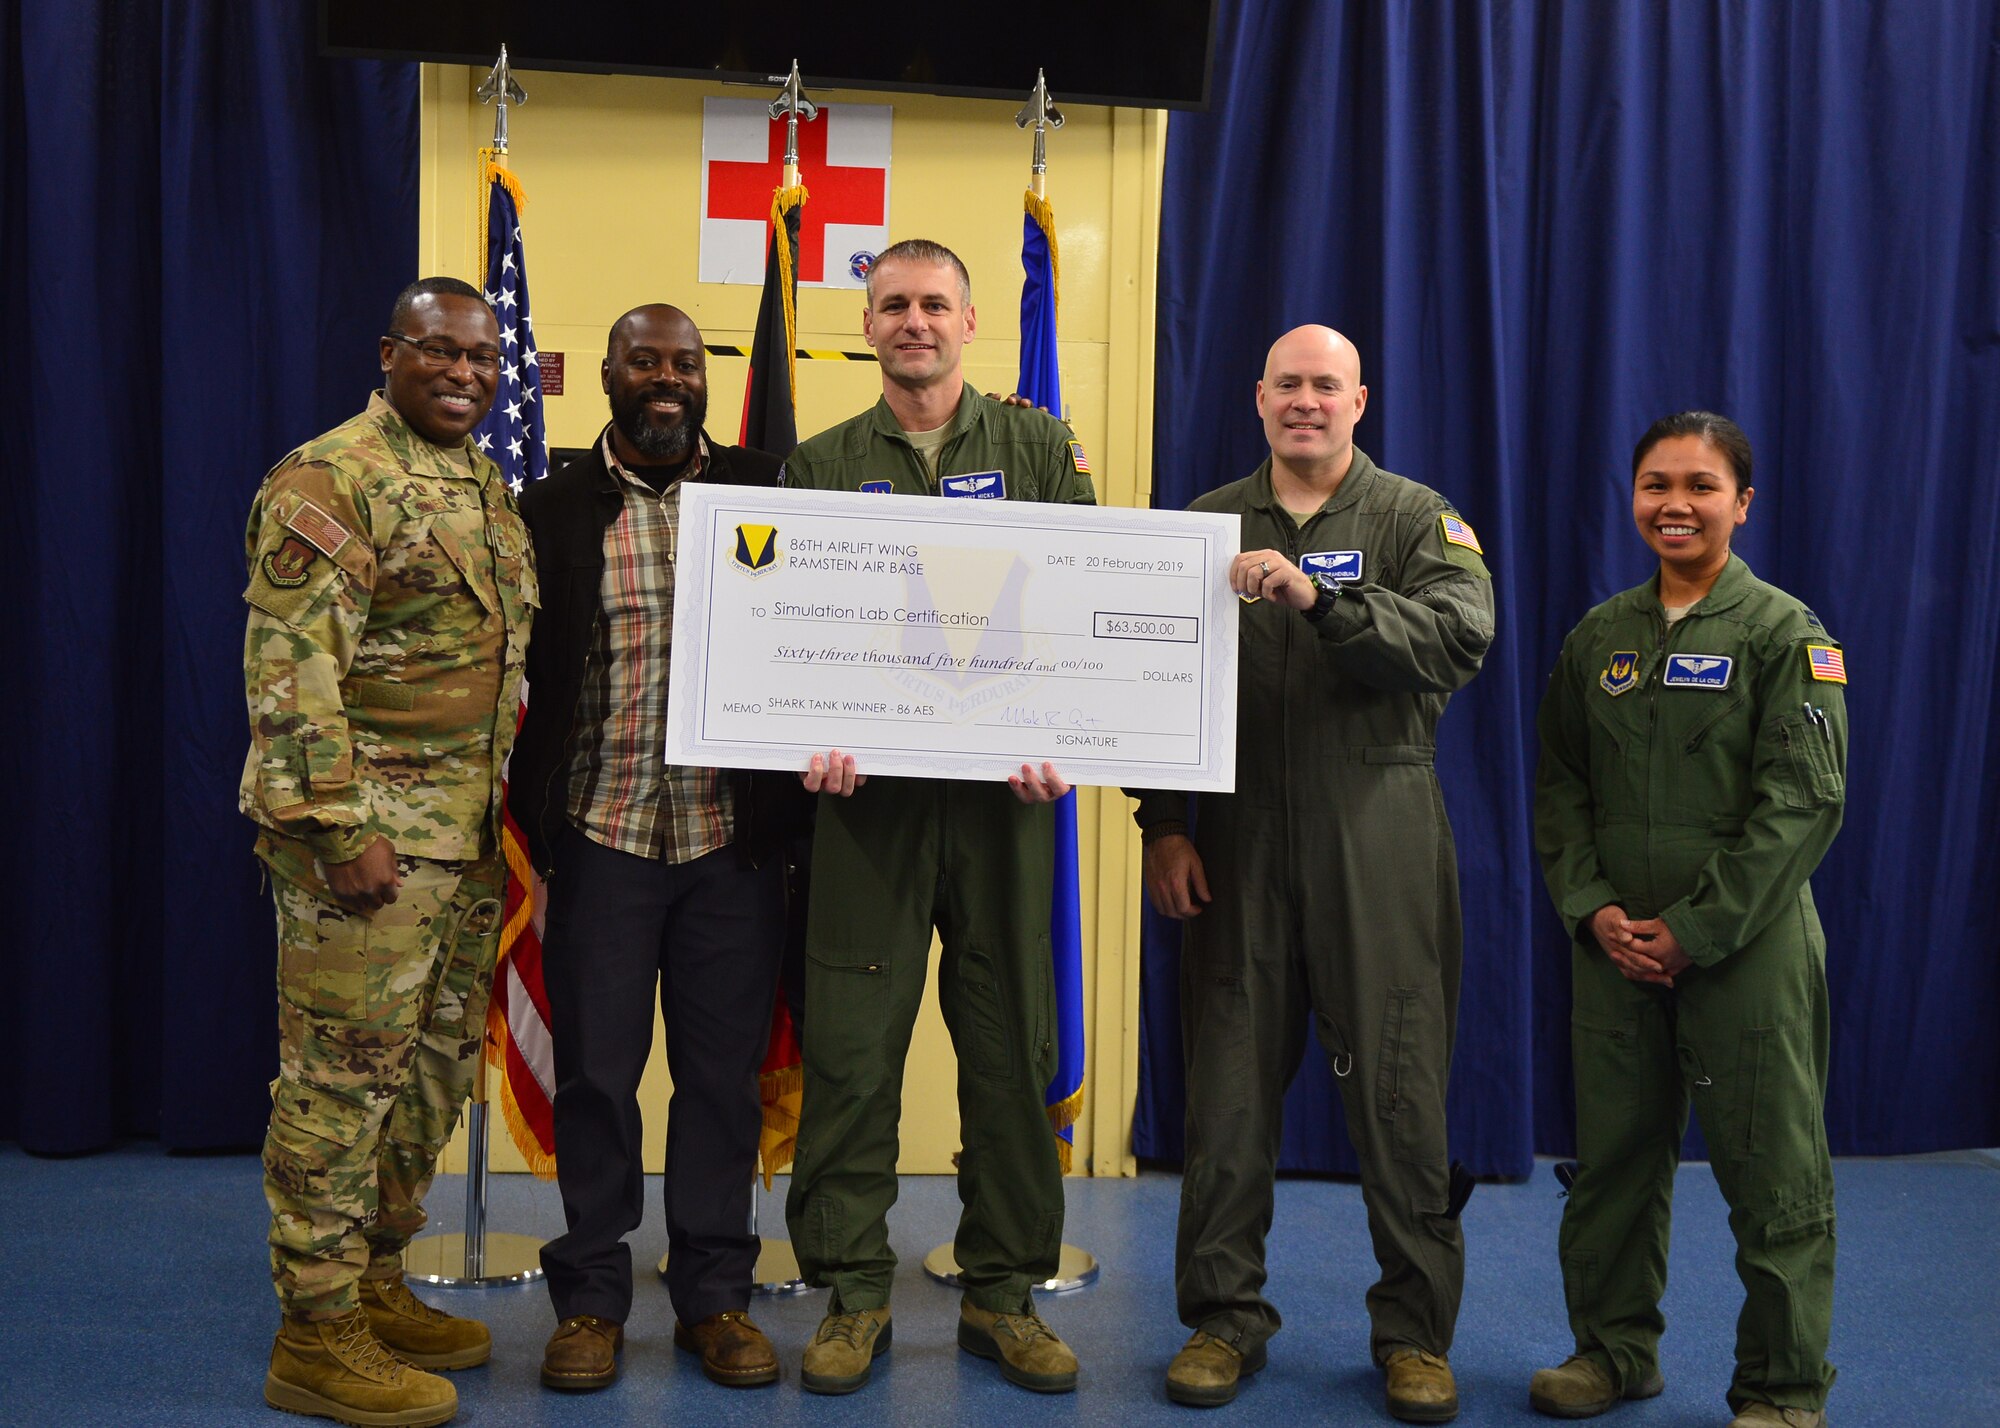 From left to right, U.S. Air Force Col. Ronald Jones, 86th Aeromedical Evacuation Squadron commander, Ali Rivers, 86th AES clinical simulation operator, Maj. Jeremy Hicks, 86th AES clinical nurse specialist, Capt. Jamison Krahenbuhl, 86th AES simulation technology officer, and Capt. Jewelyn De La Cruz, 86th AES simulation technology element leader, show off a check awarded to their team at Ramstein Air Base, Germany, March 11, 2019.